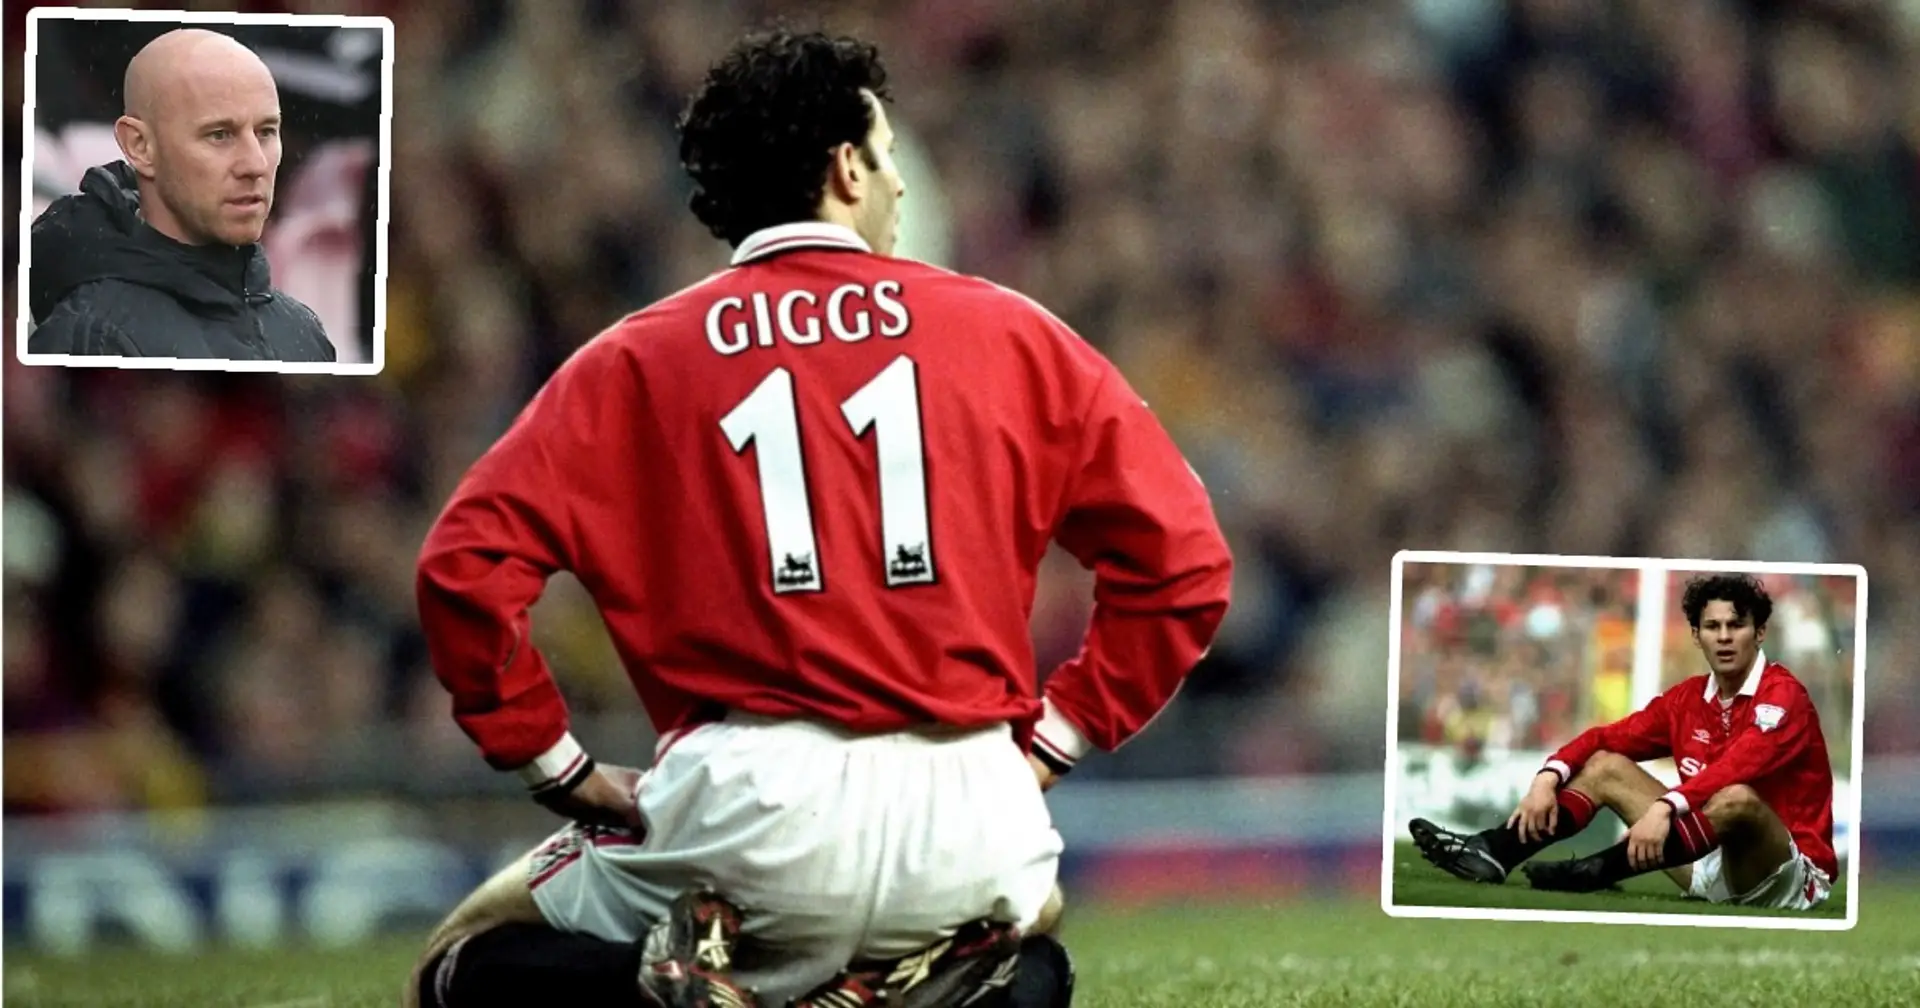 Man United player compared to Ryan Giggs - he hasn't featured for the club in over a year